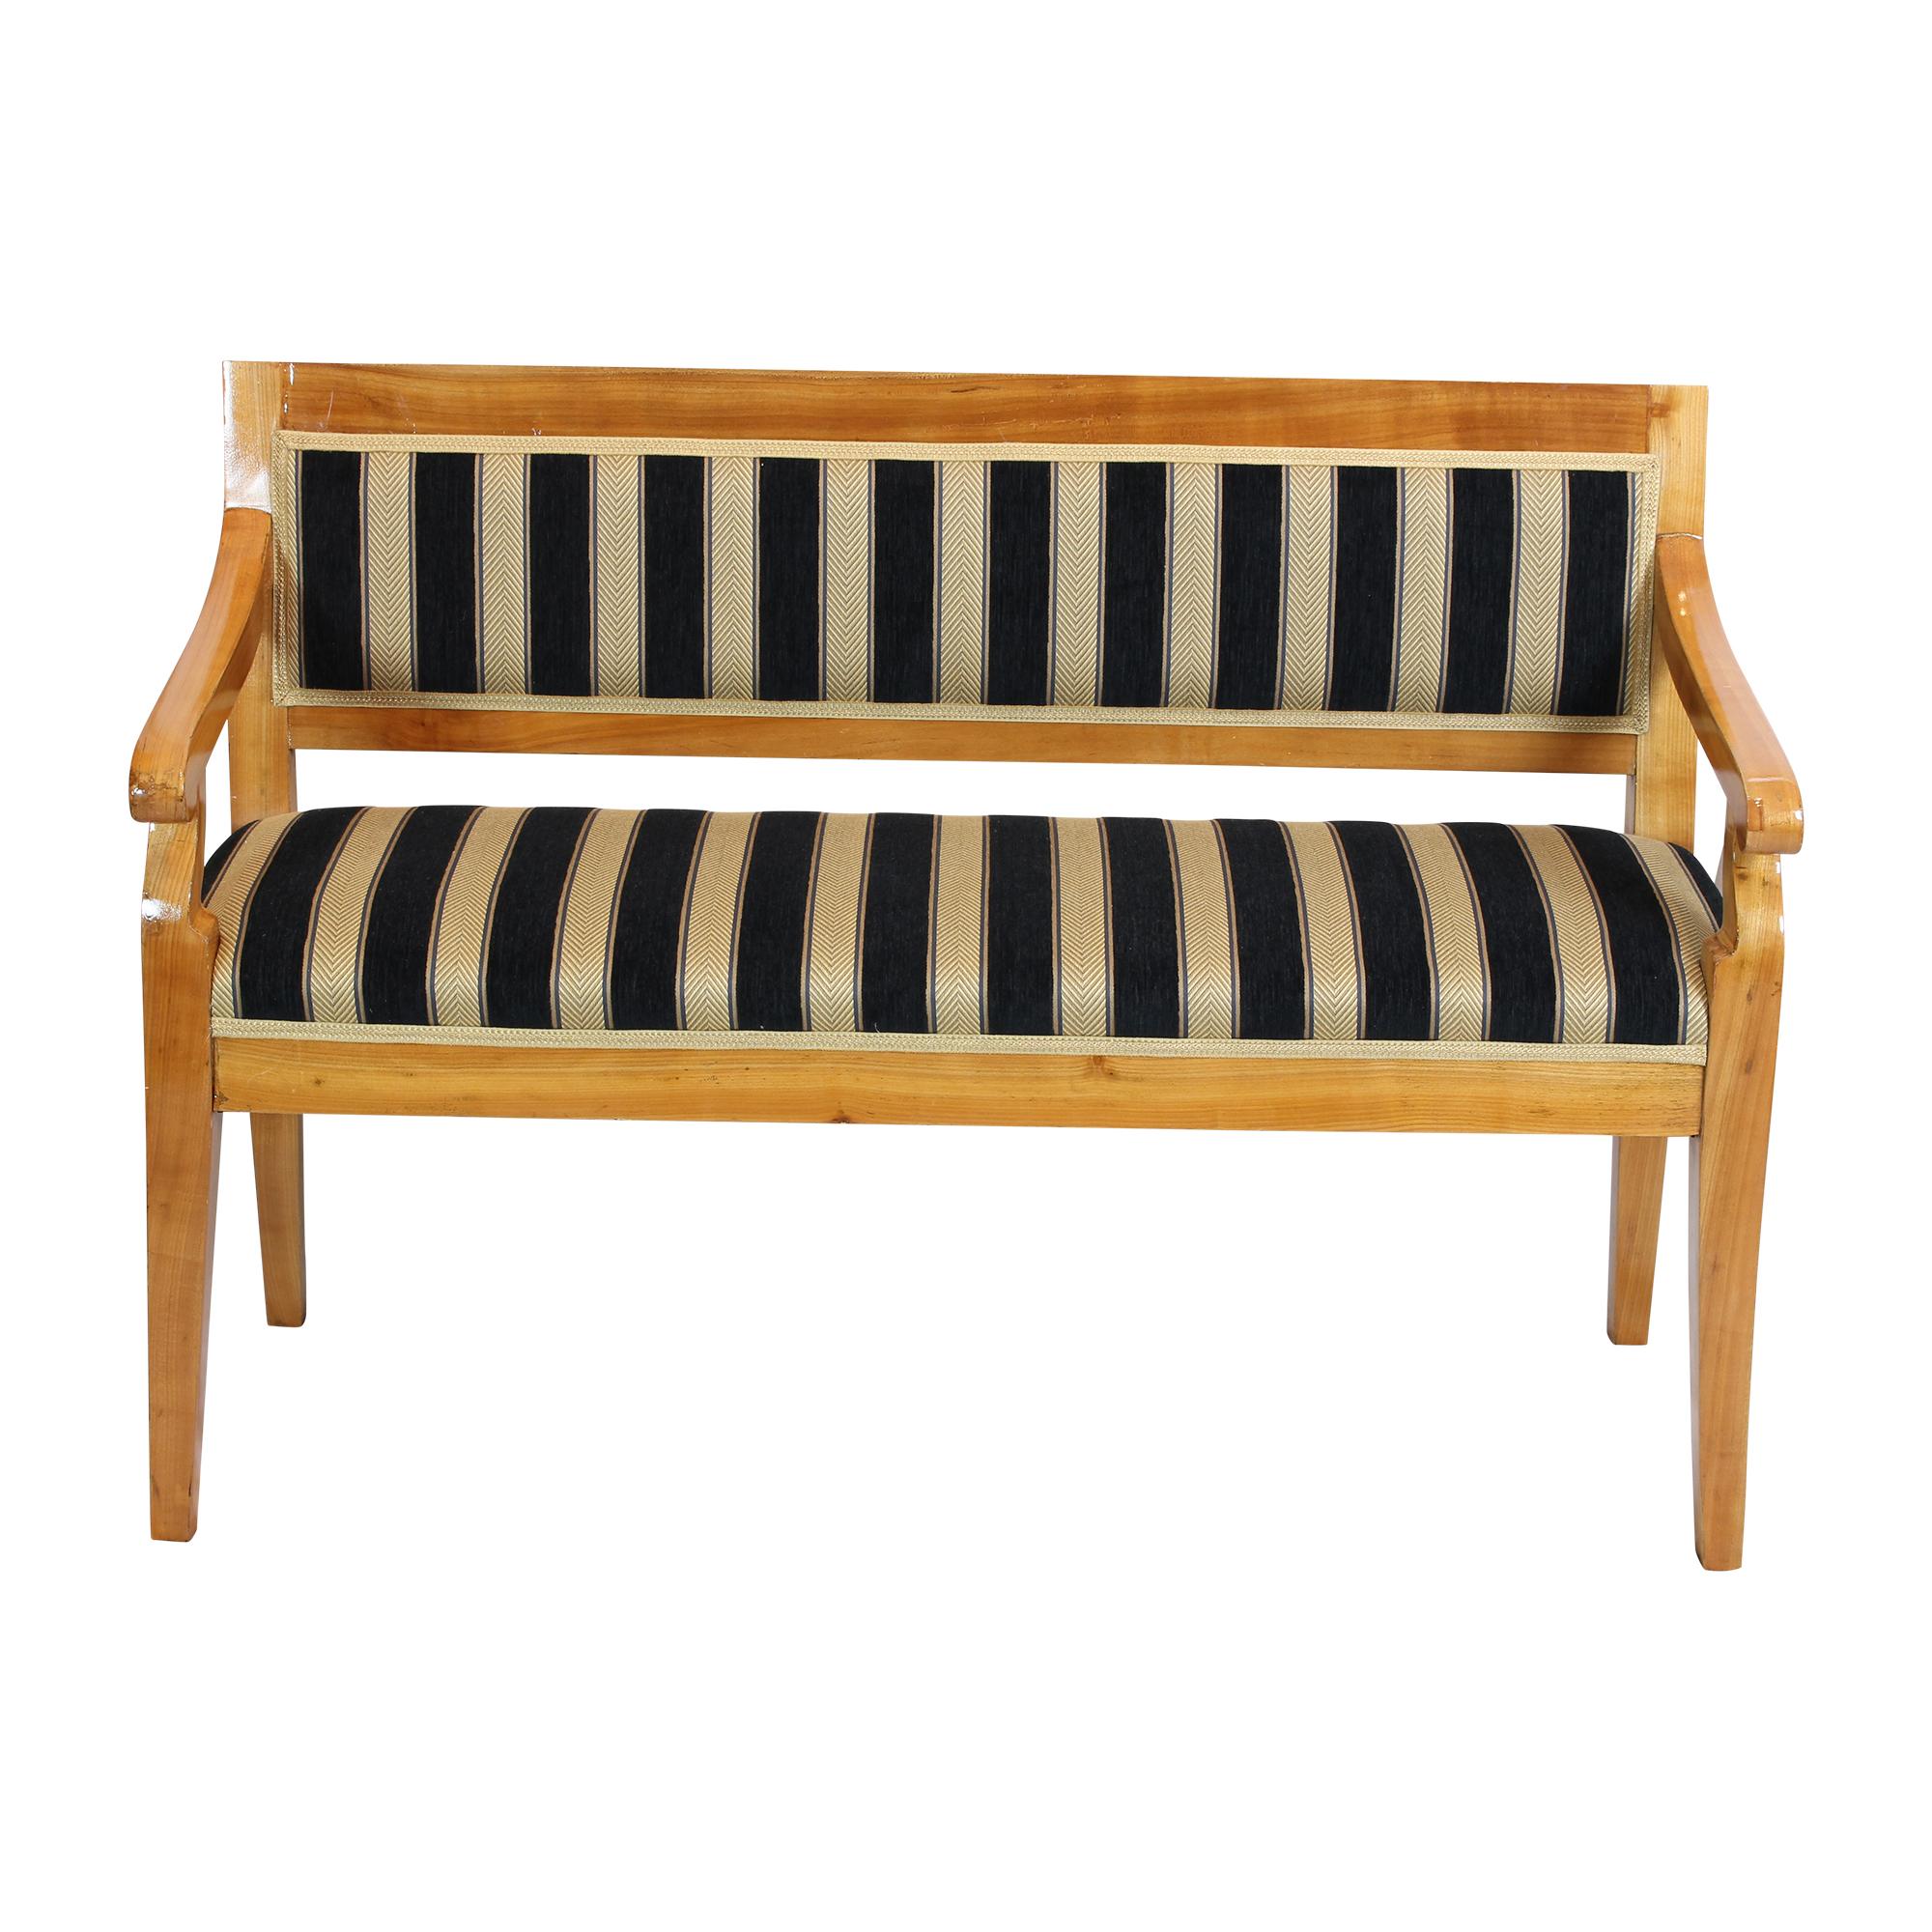 Extremely rare bench with small practical size from the Biedermeier period. The bench is made of cherry wood, partly veneered and partly solid. The bench has been reupholstered and re-covered with Biedermeier fabric. In very good restored condition.